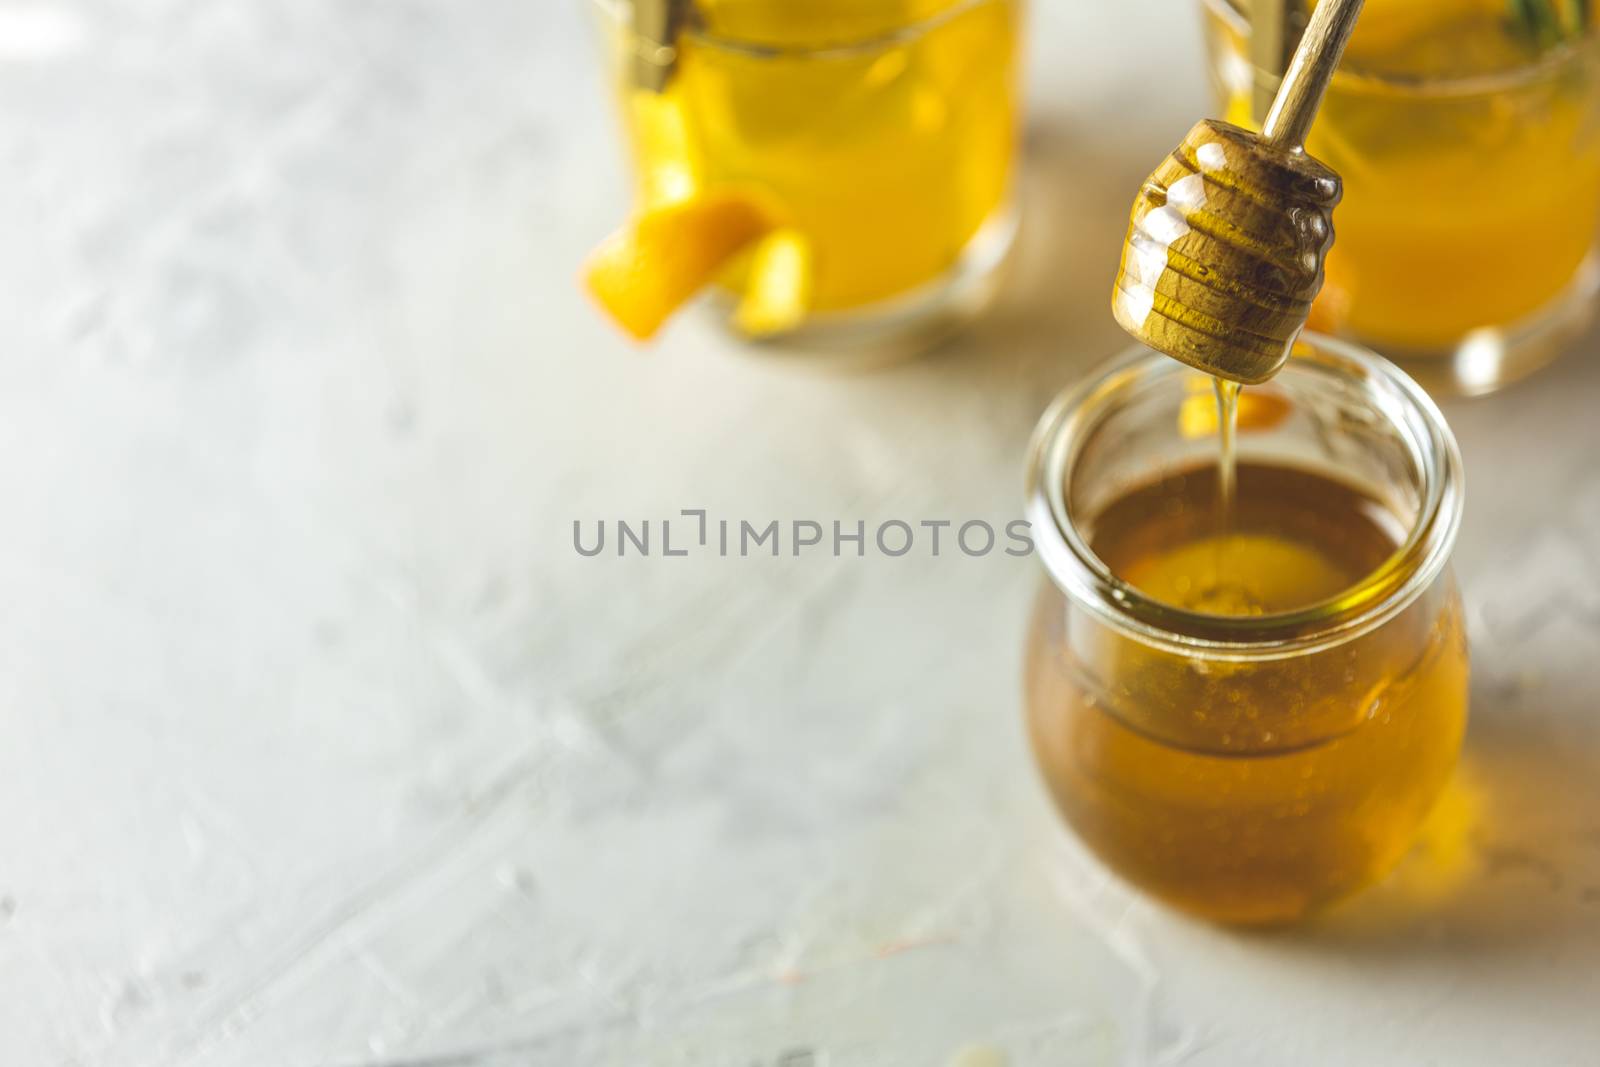 Spoon for honey over jar in front of two glasses of honey bourbo by ArtSvitlyna